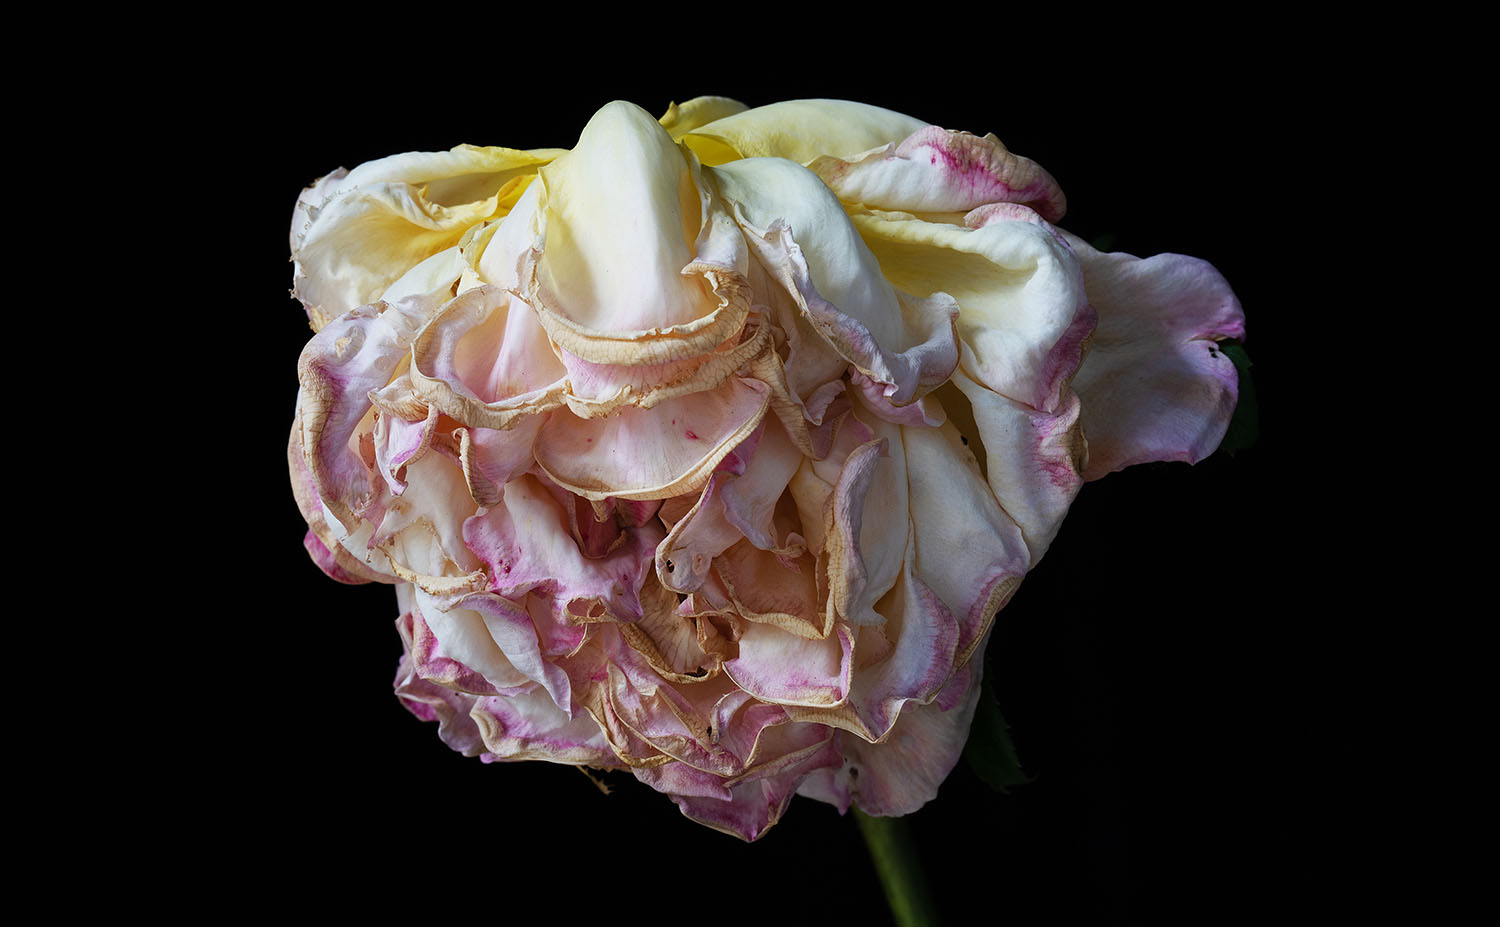 Rob Love Photography, Melbourne. Photo of Flower, Ageless Beauty